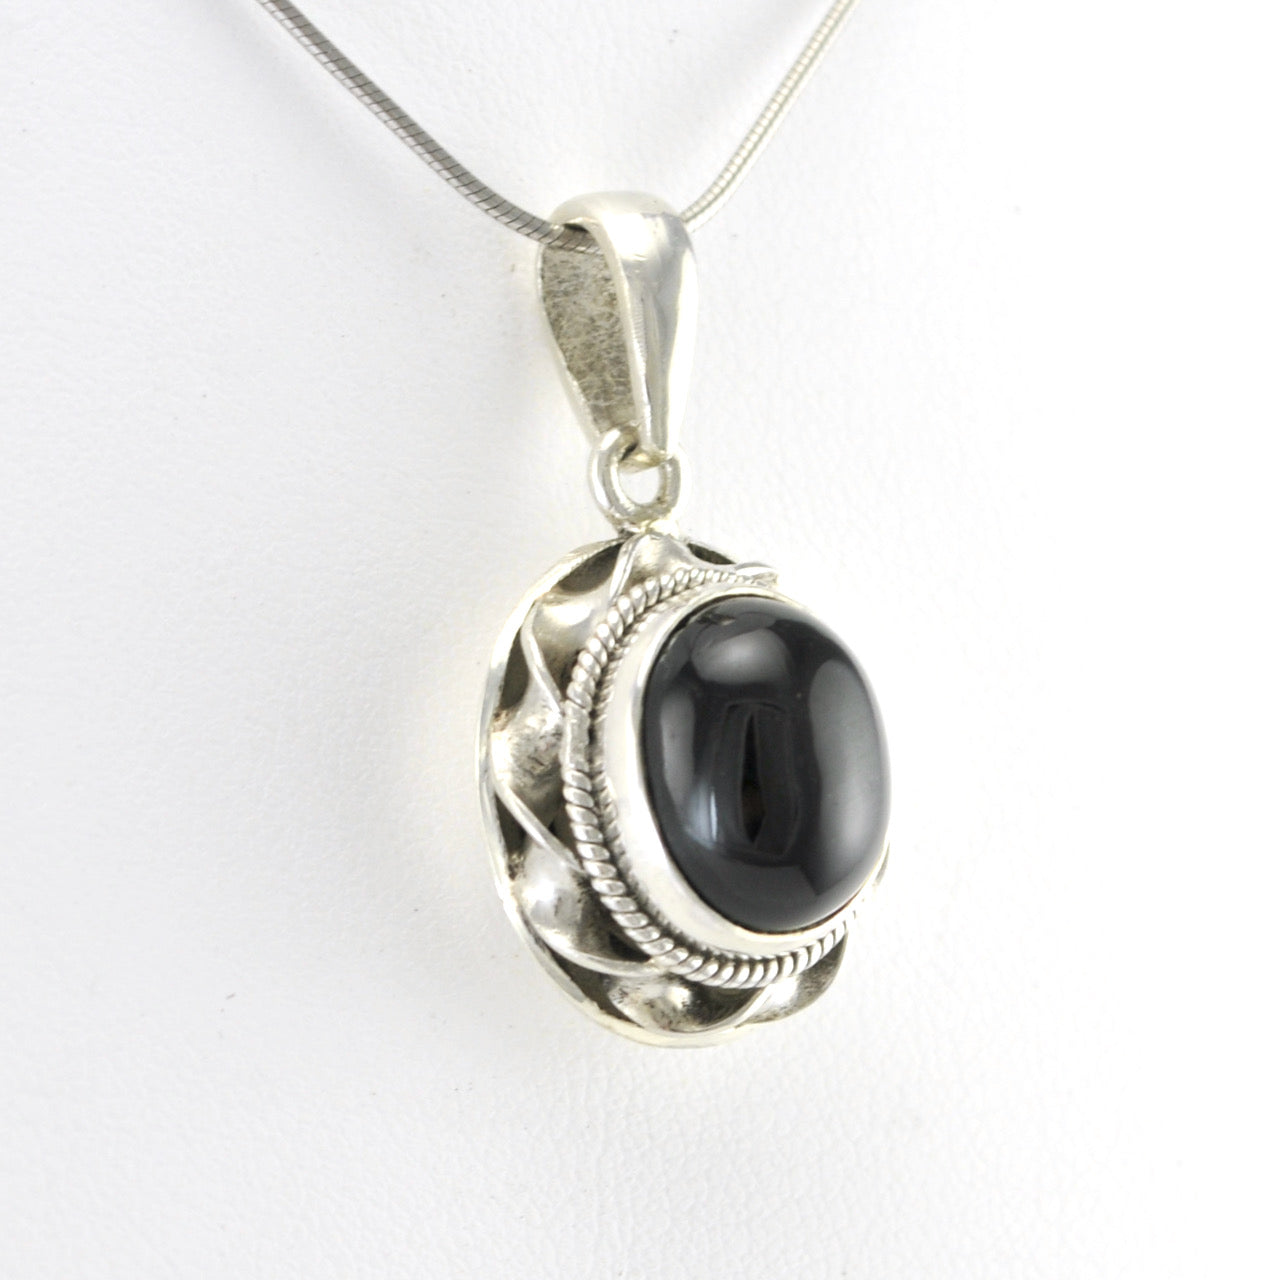 View Silver Black Star Diopside Oval Pendant